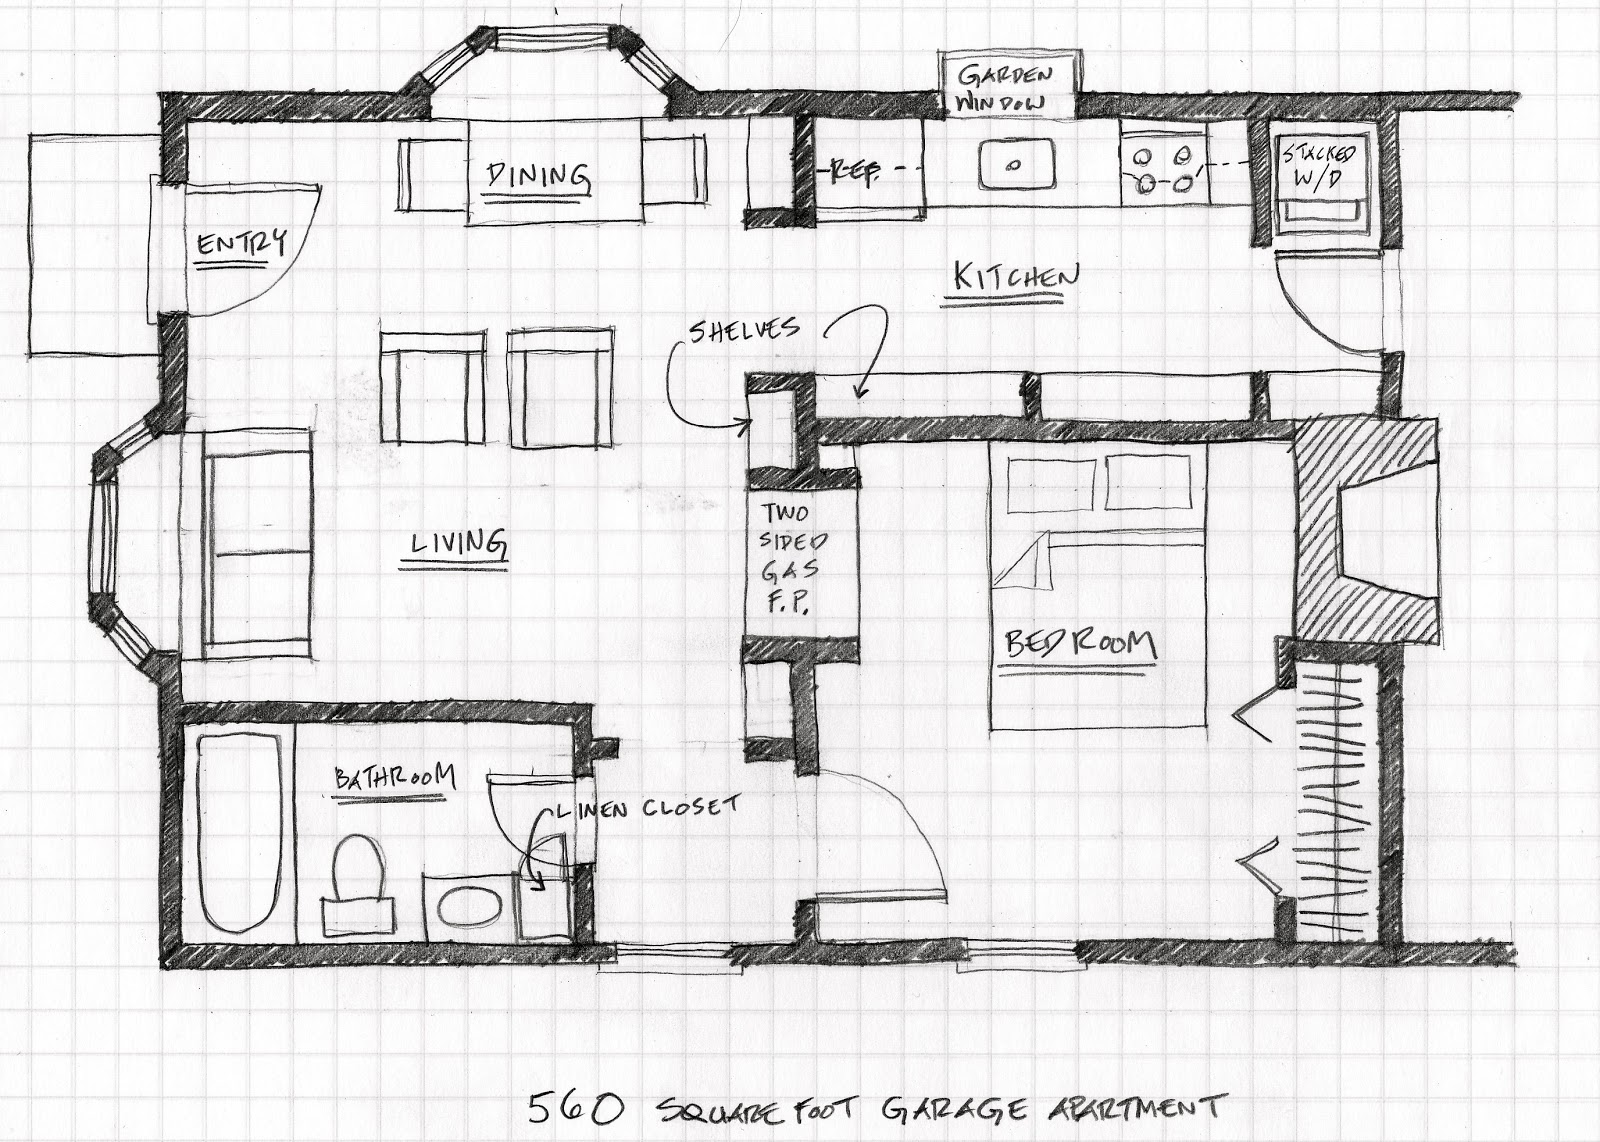 Small Scale Homes: Floor Plans for Garage to Apartment Conversion